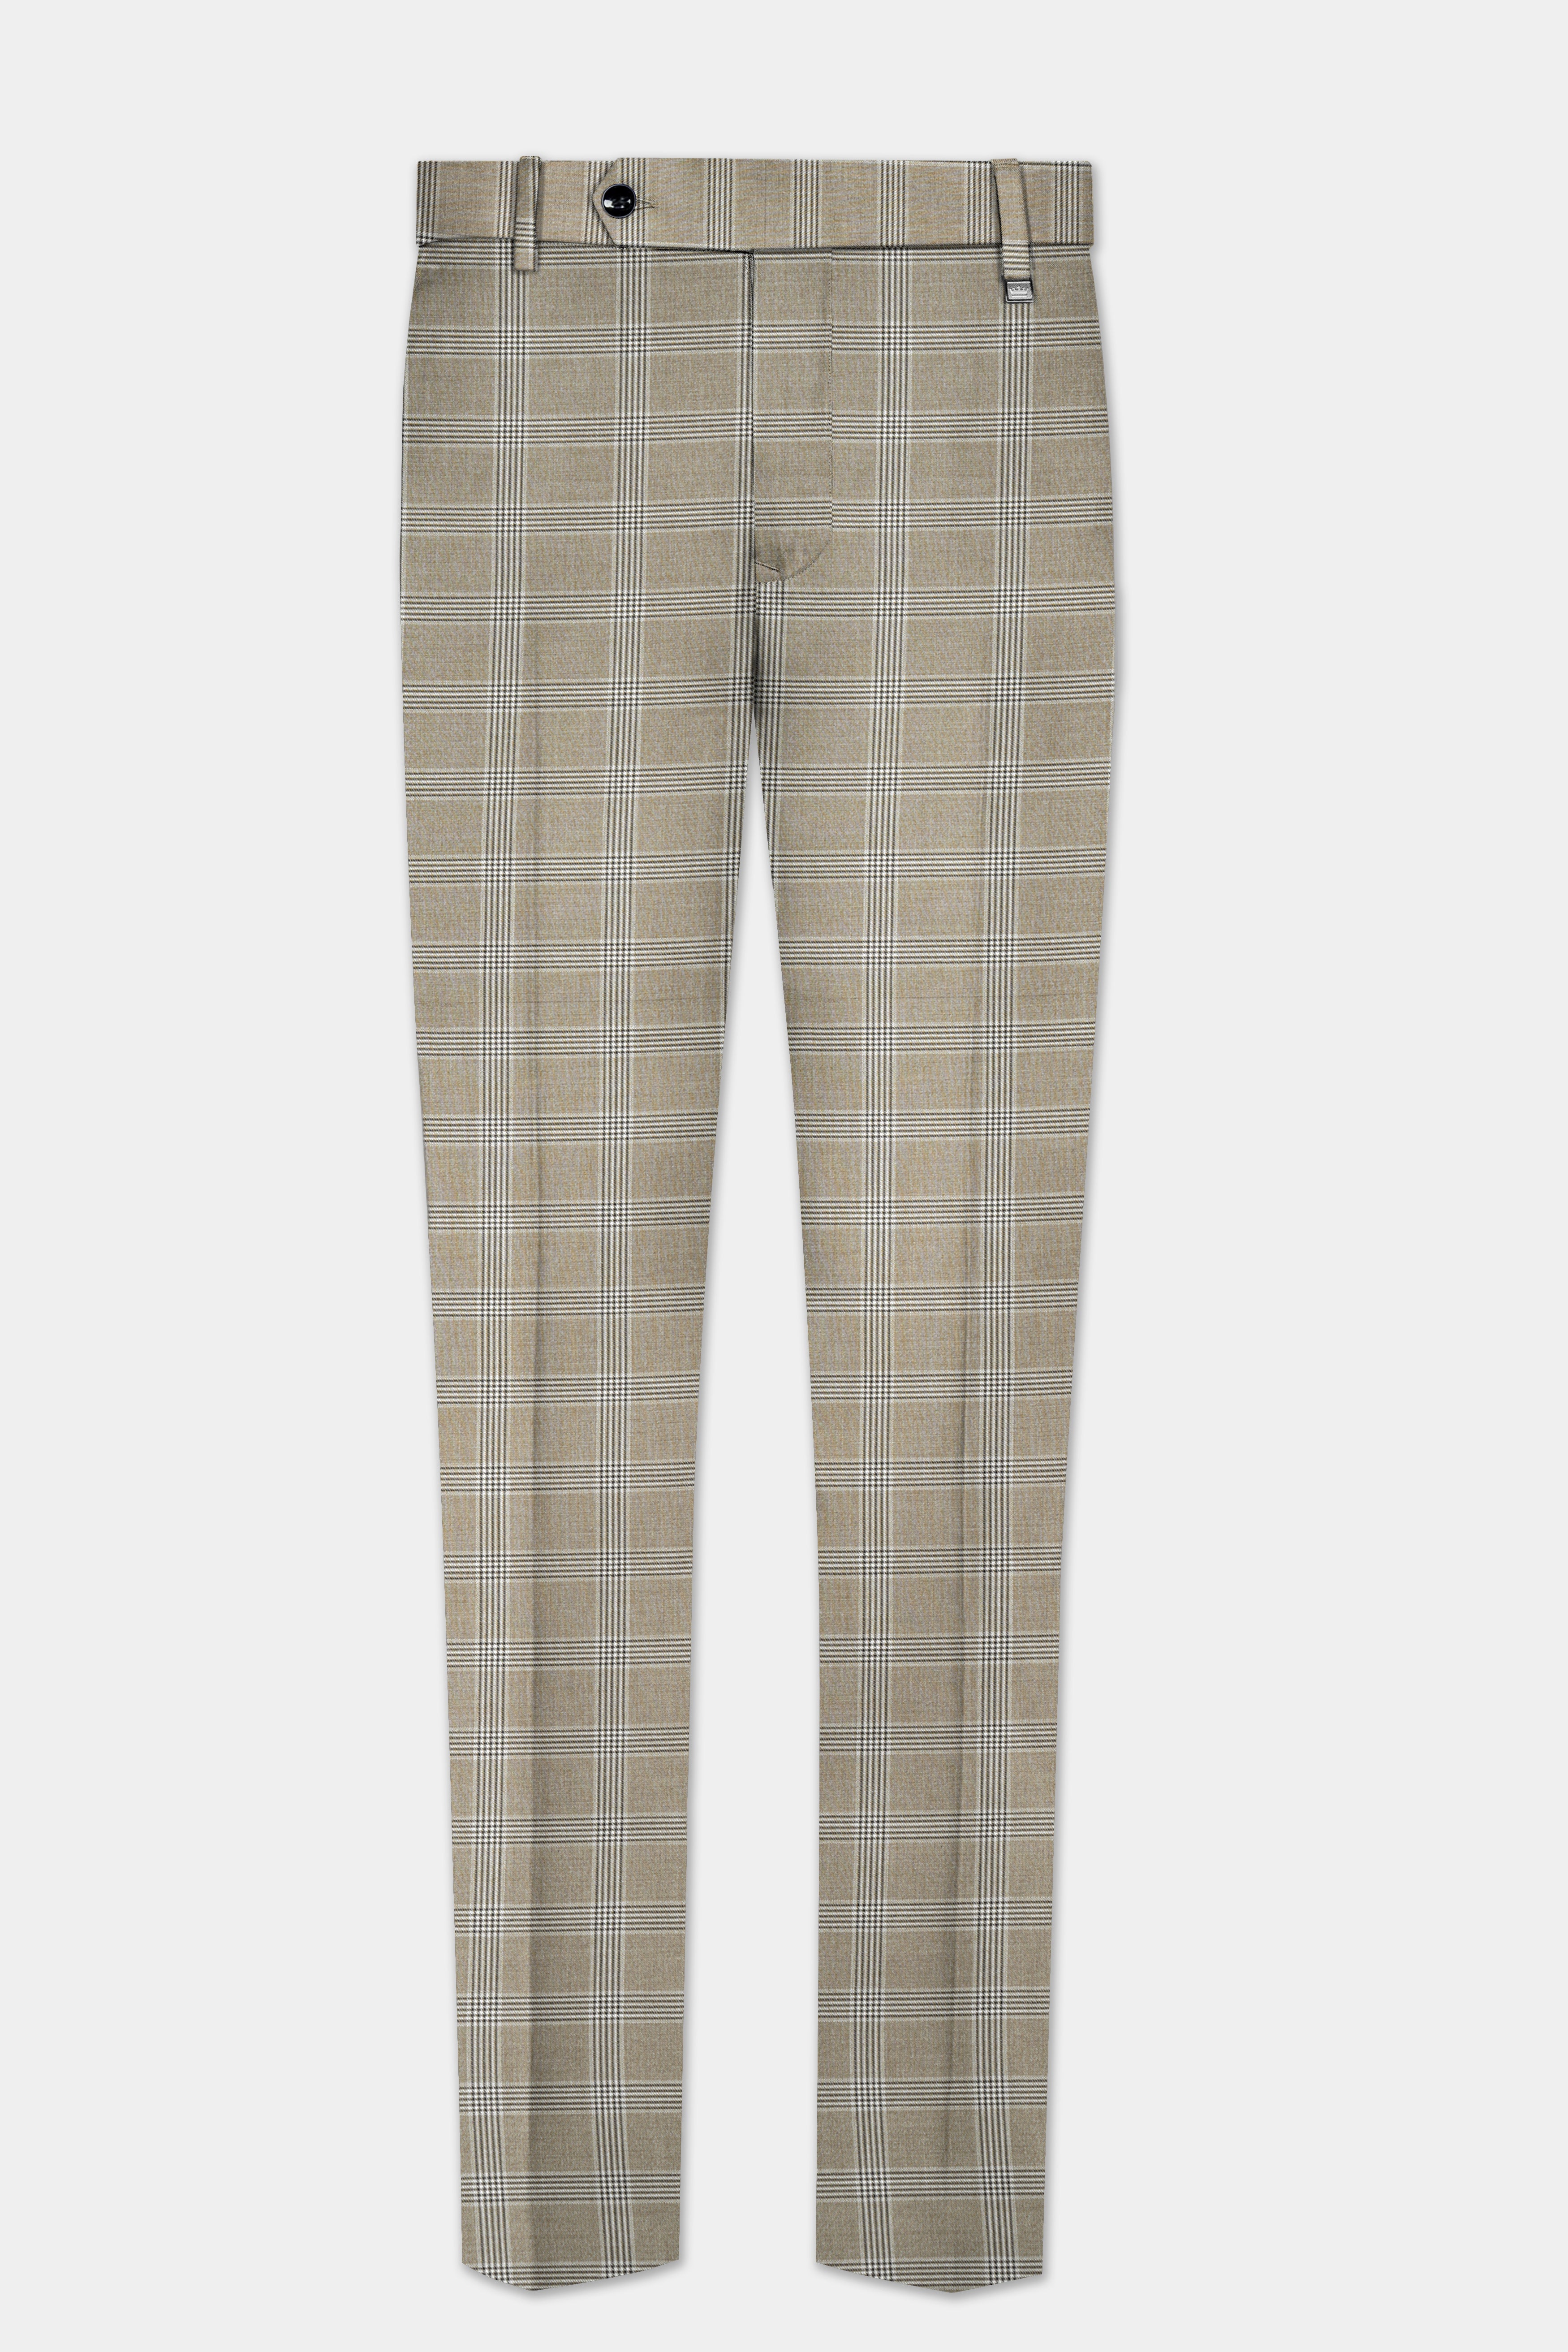 Sandrift Cream Plaid Wool Blend Double Breasted Suit